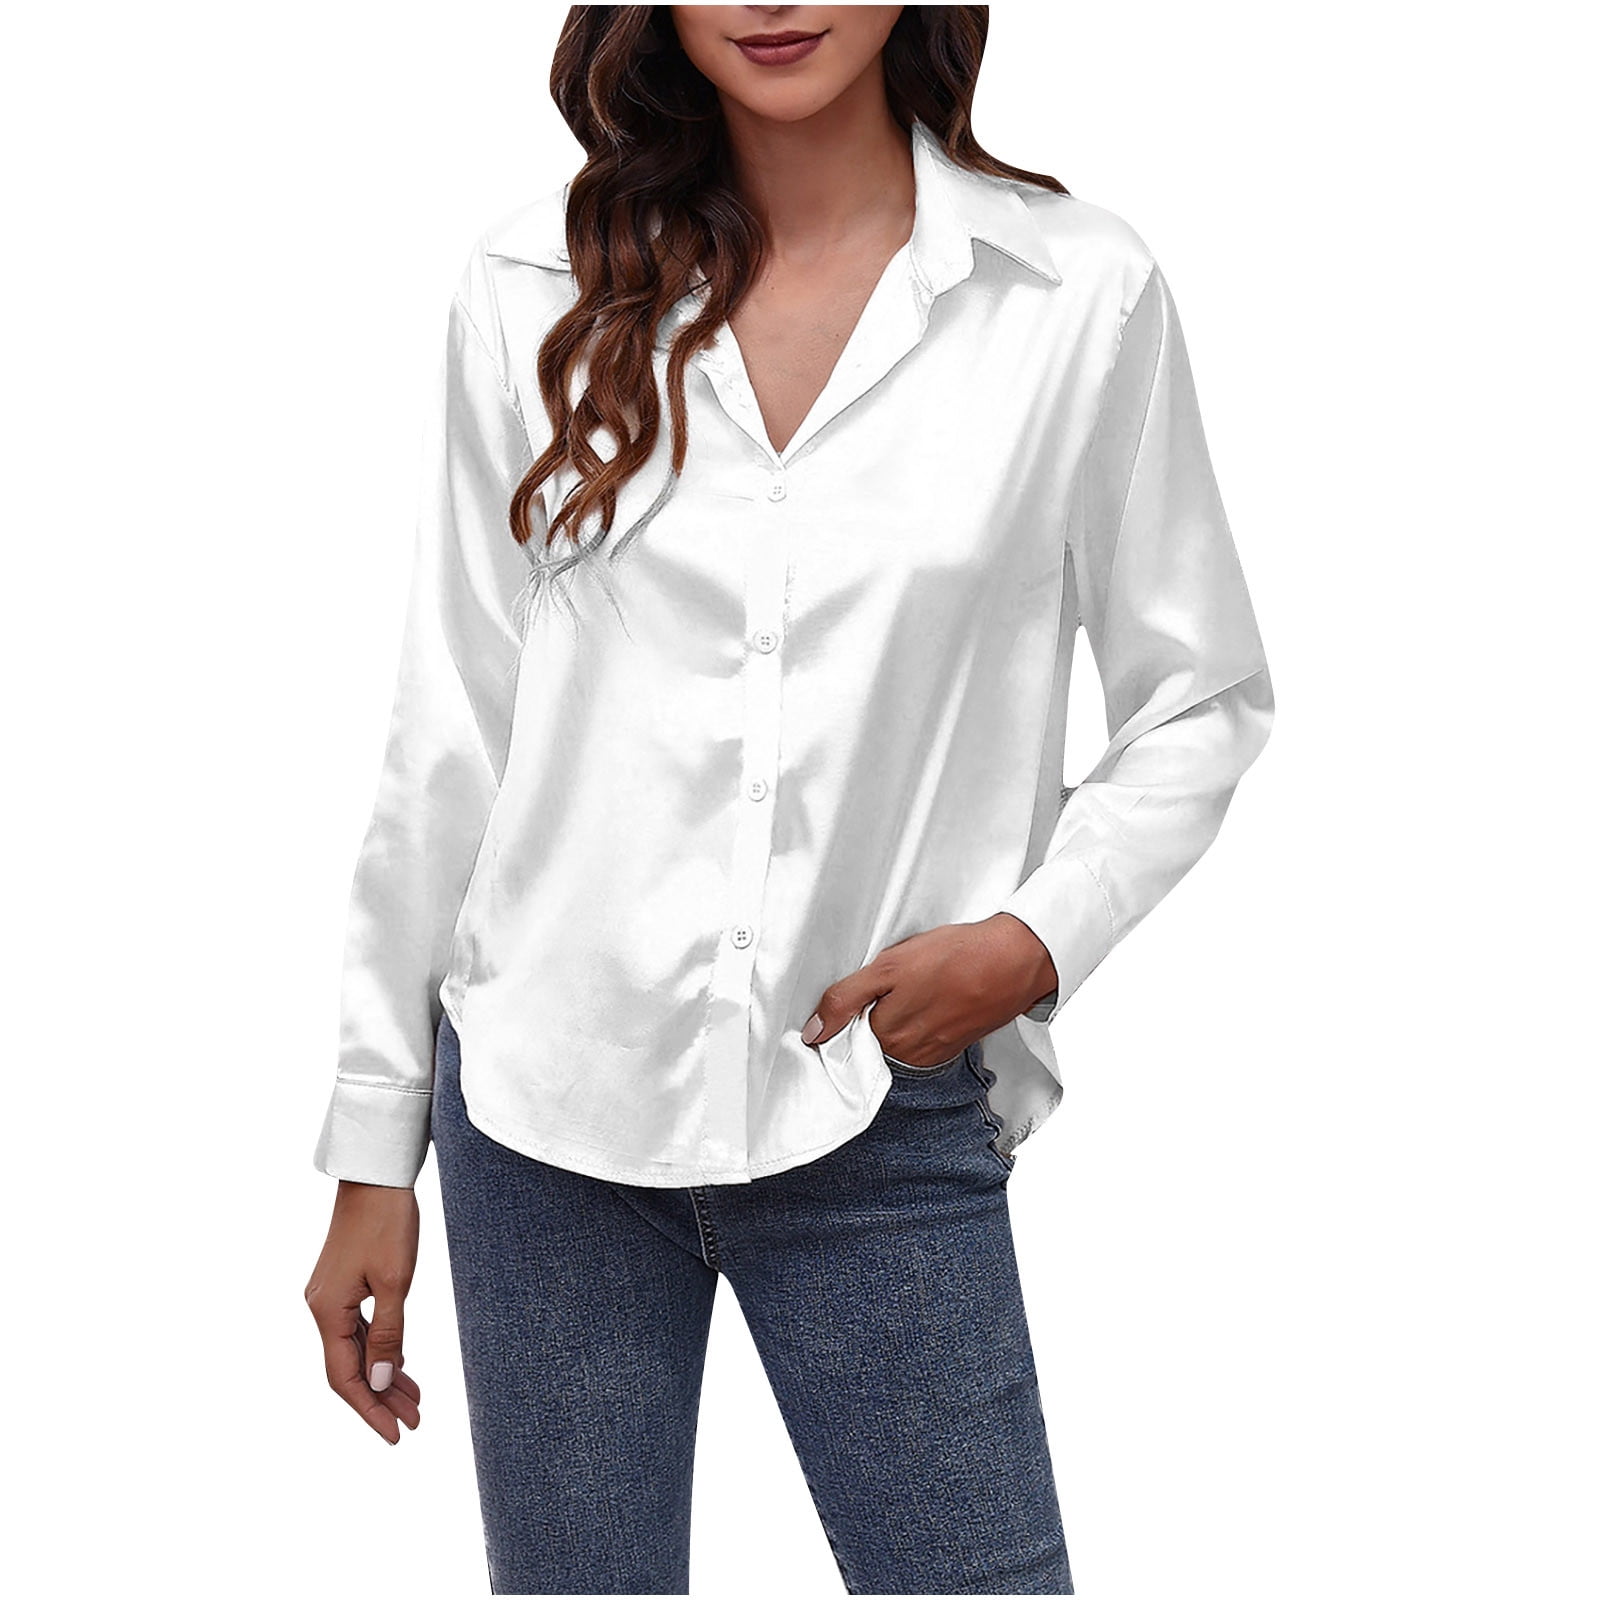 Women's Satin Silk Long Sleeve Button Down Collared Shirt Formal Work  Blouse Top Casual Solid Shirts for Office Lady